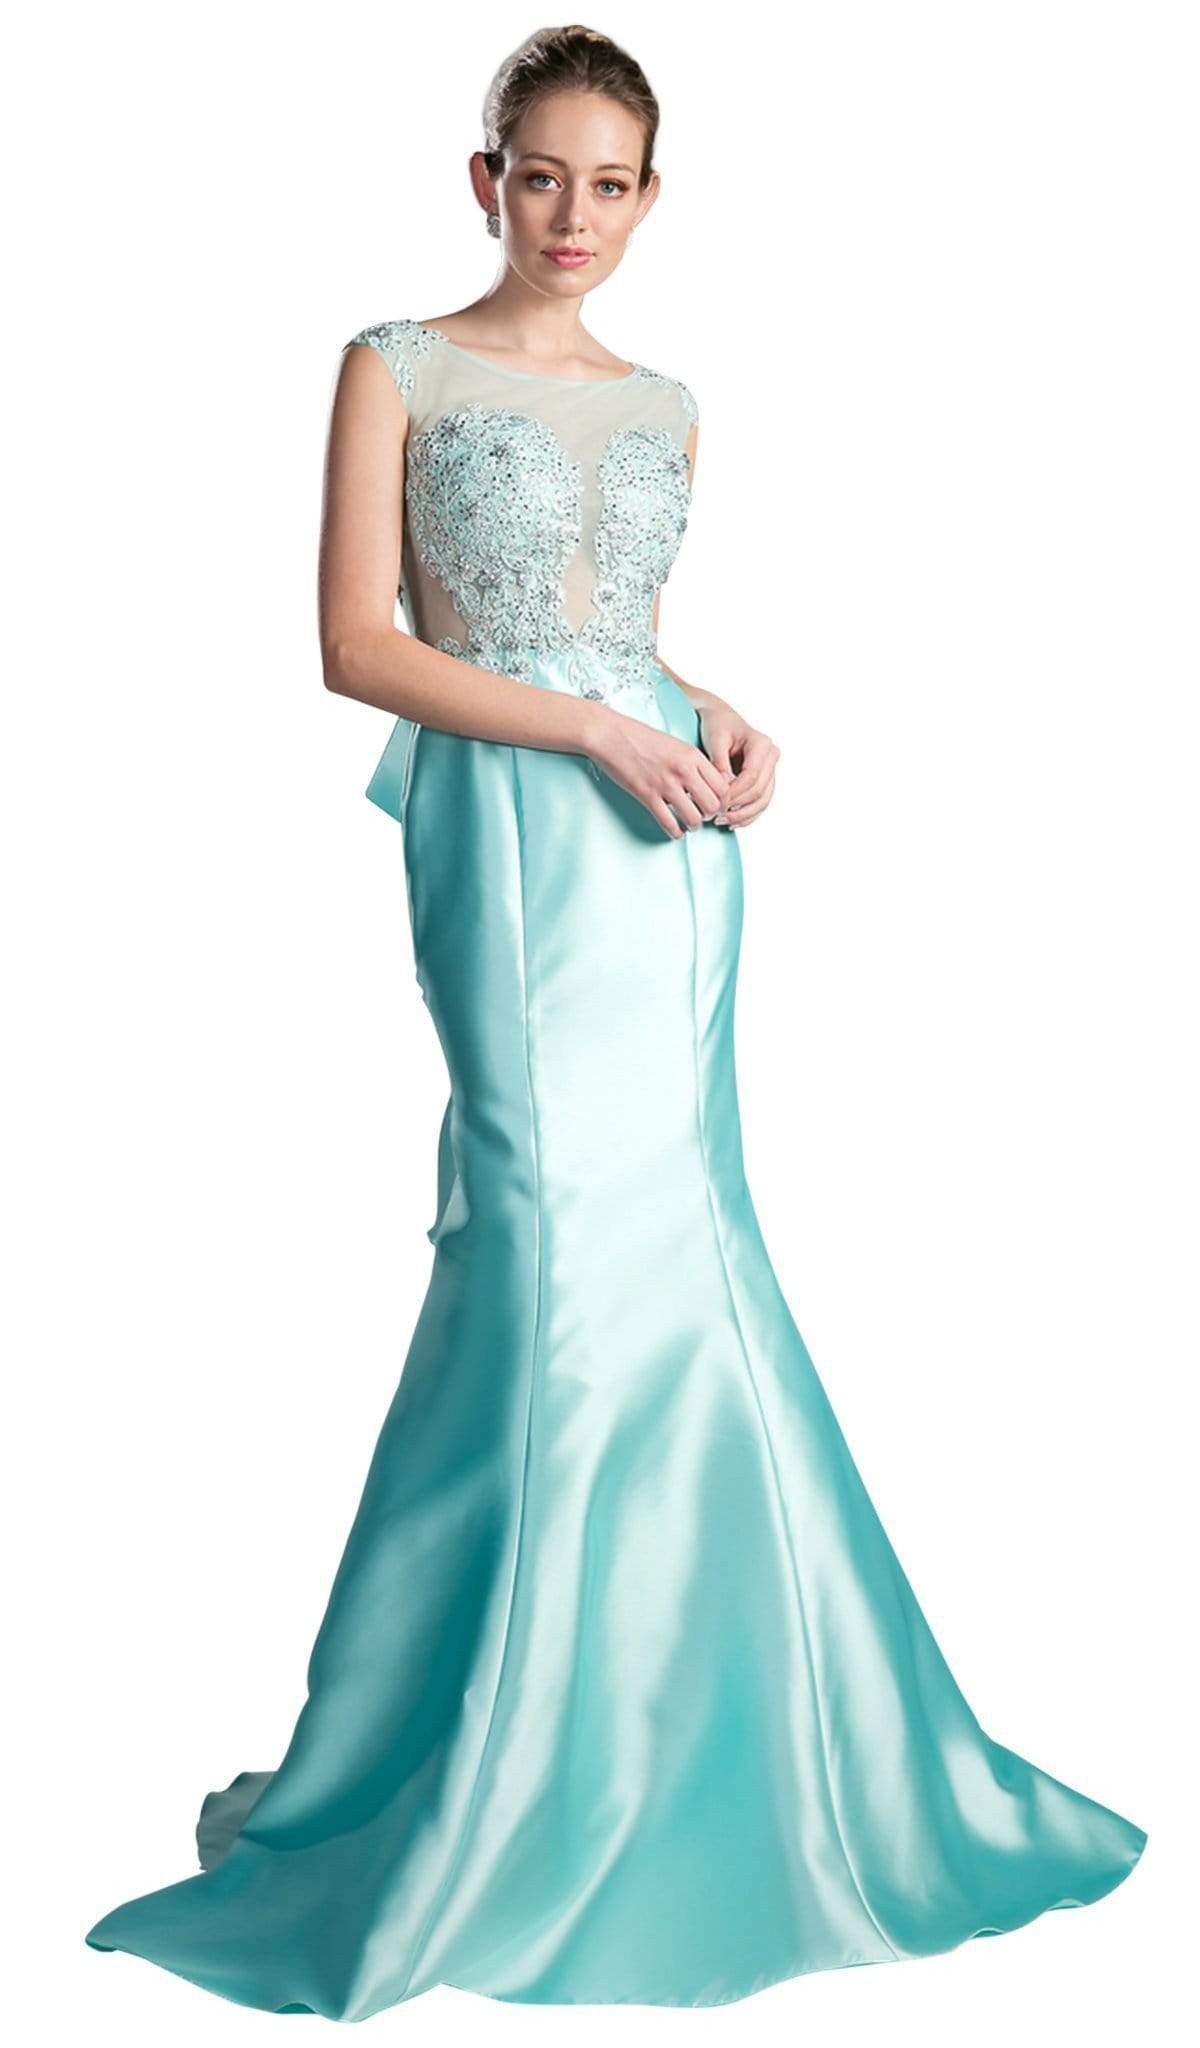 Cinderella Divine - Cap Sleeve Appliqued Plunging Illusion Gown Special Occasion Dress 2 / Mint